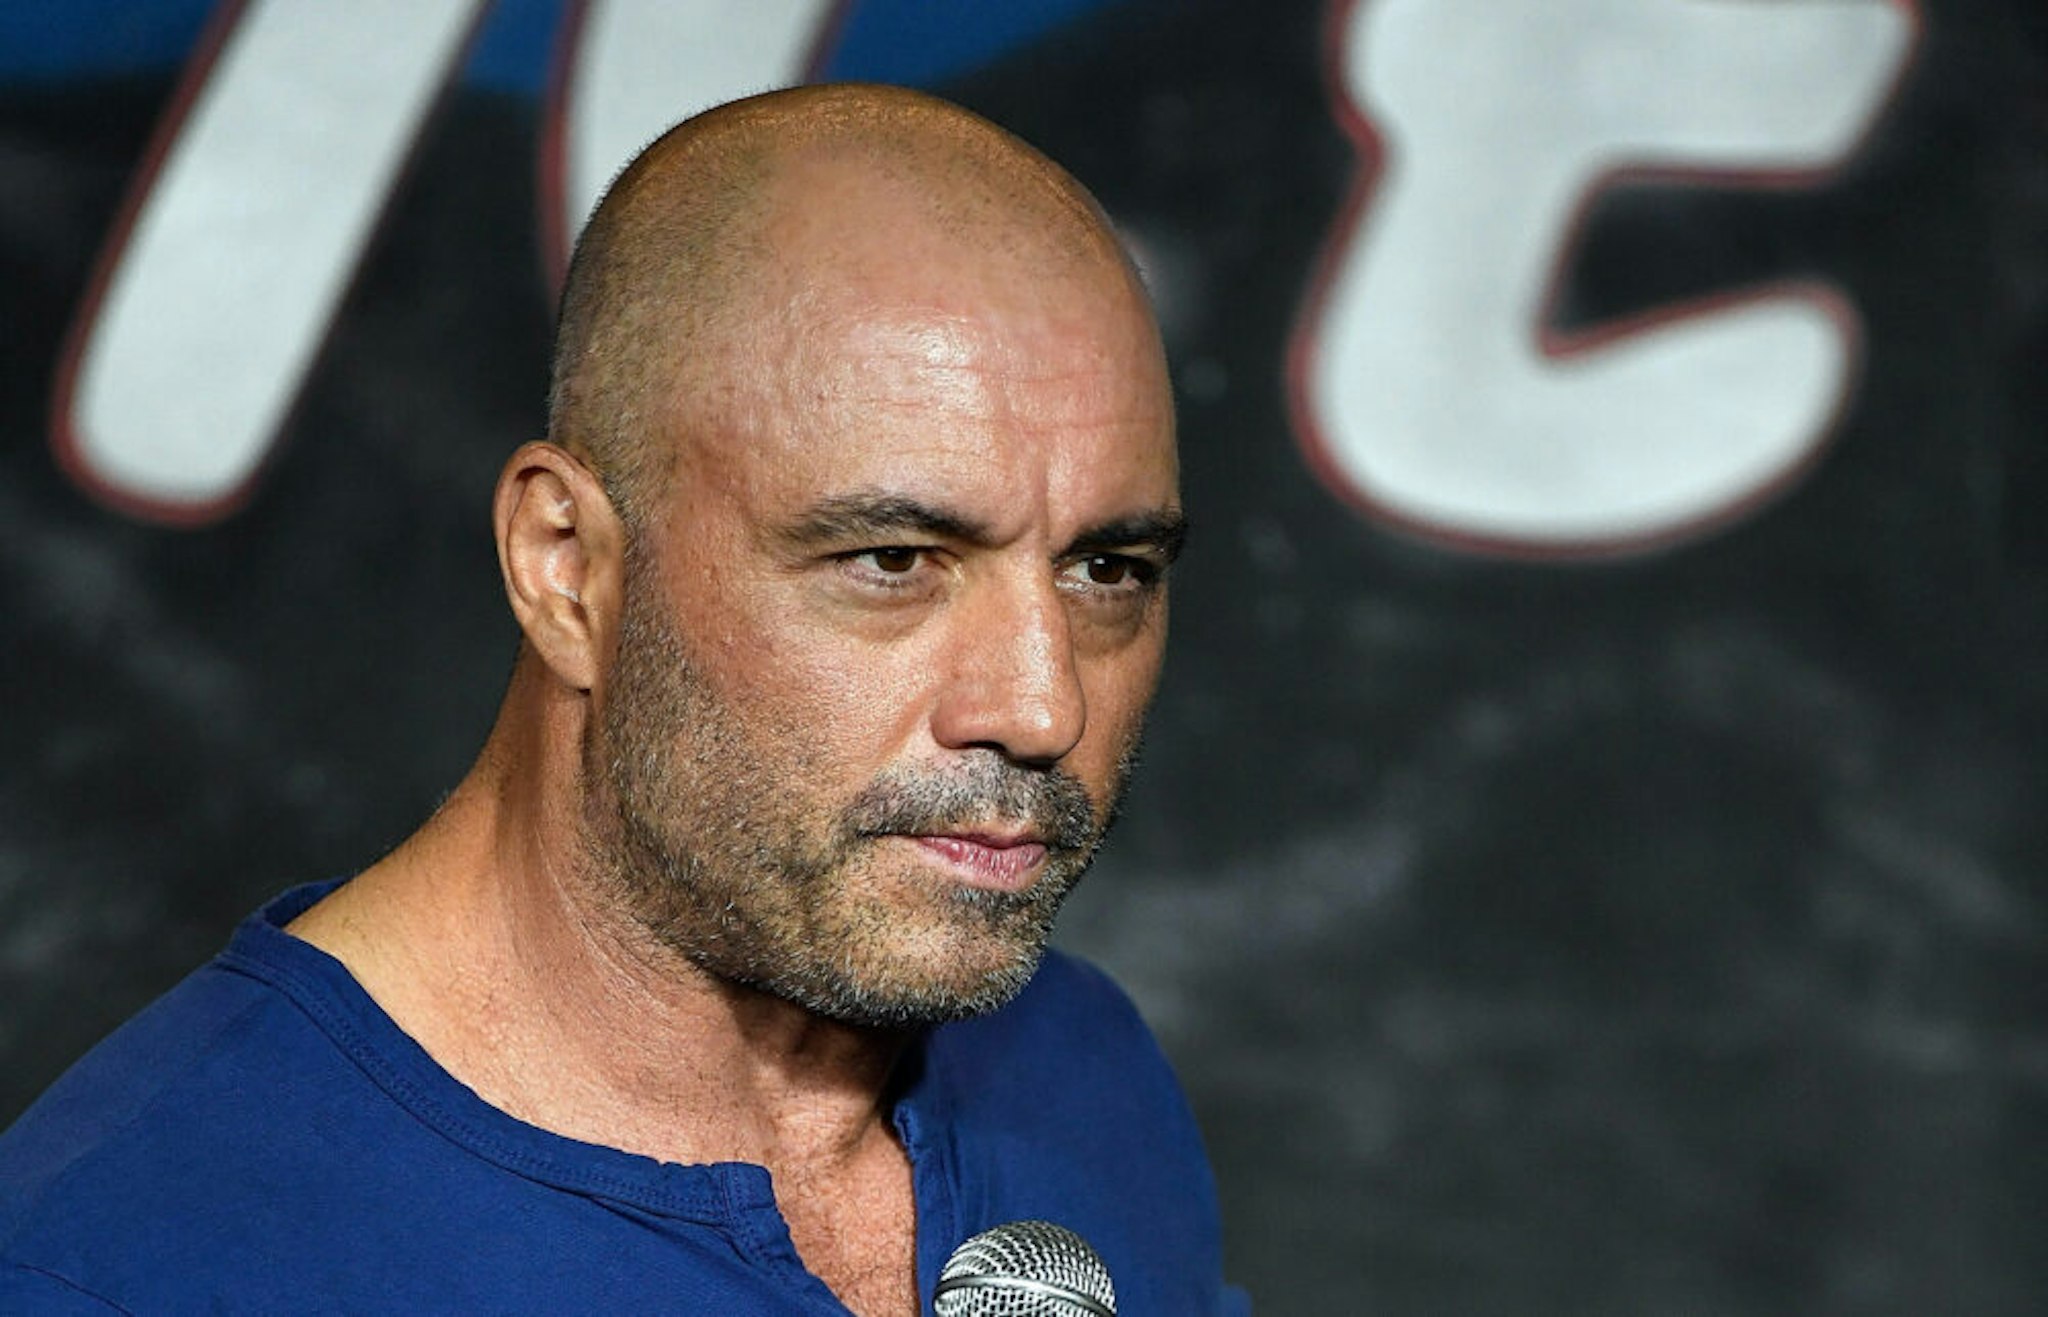 Comedian Joe Rogan performs during his appearance at The Ice House Comedy Club on September 27, 2017 in Pasadena, California. (Photo by Michael Schwartz/WireImage)